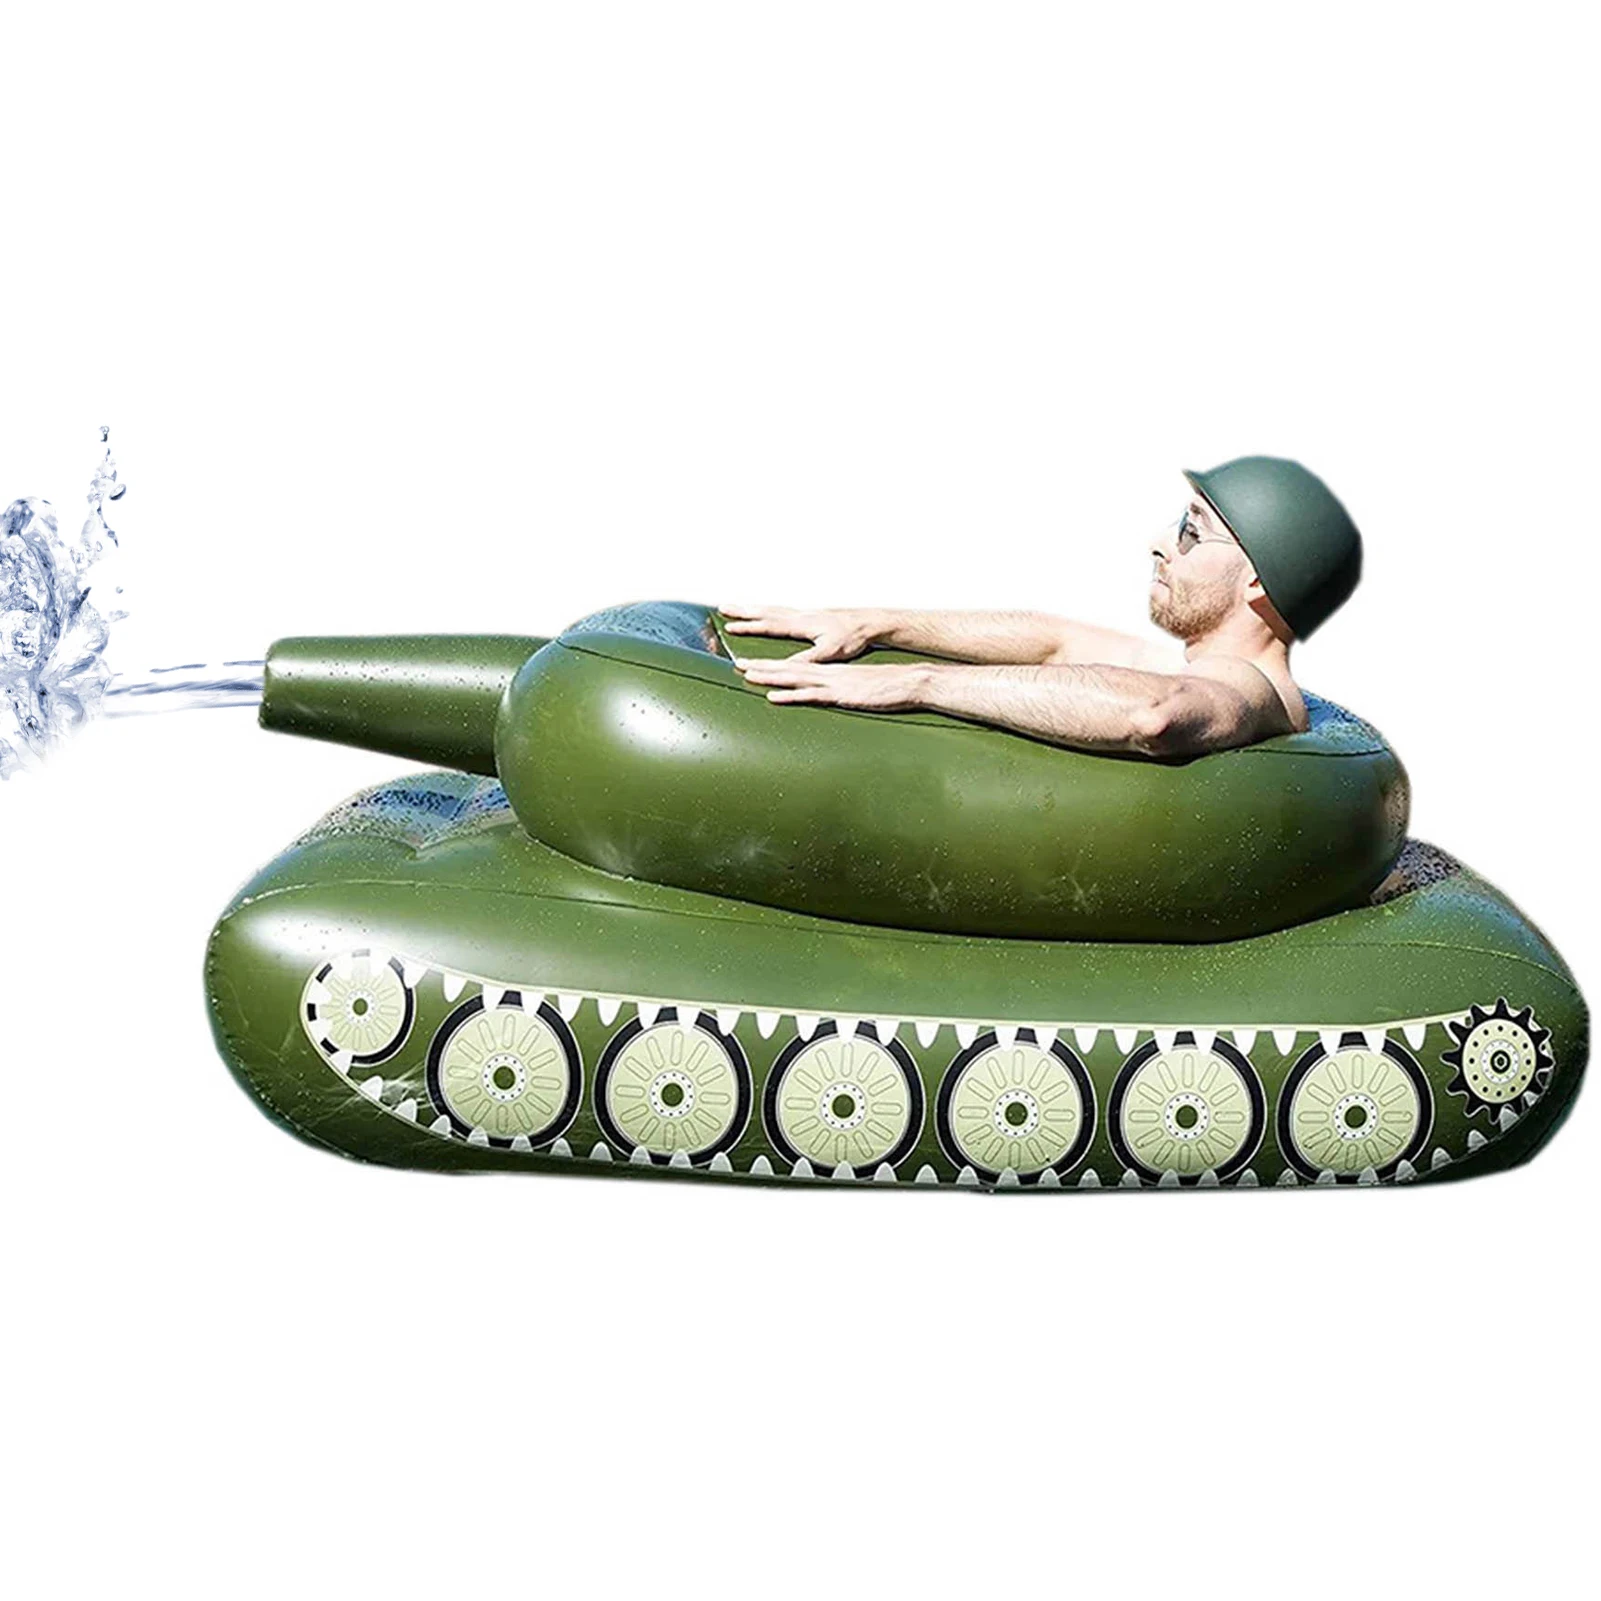 

Inflatable Tank Float Pool Inflatables For Adults Giant Inflatable Pool Floats For Adults Tank Toy With Cannon For Kids And